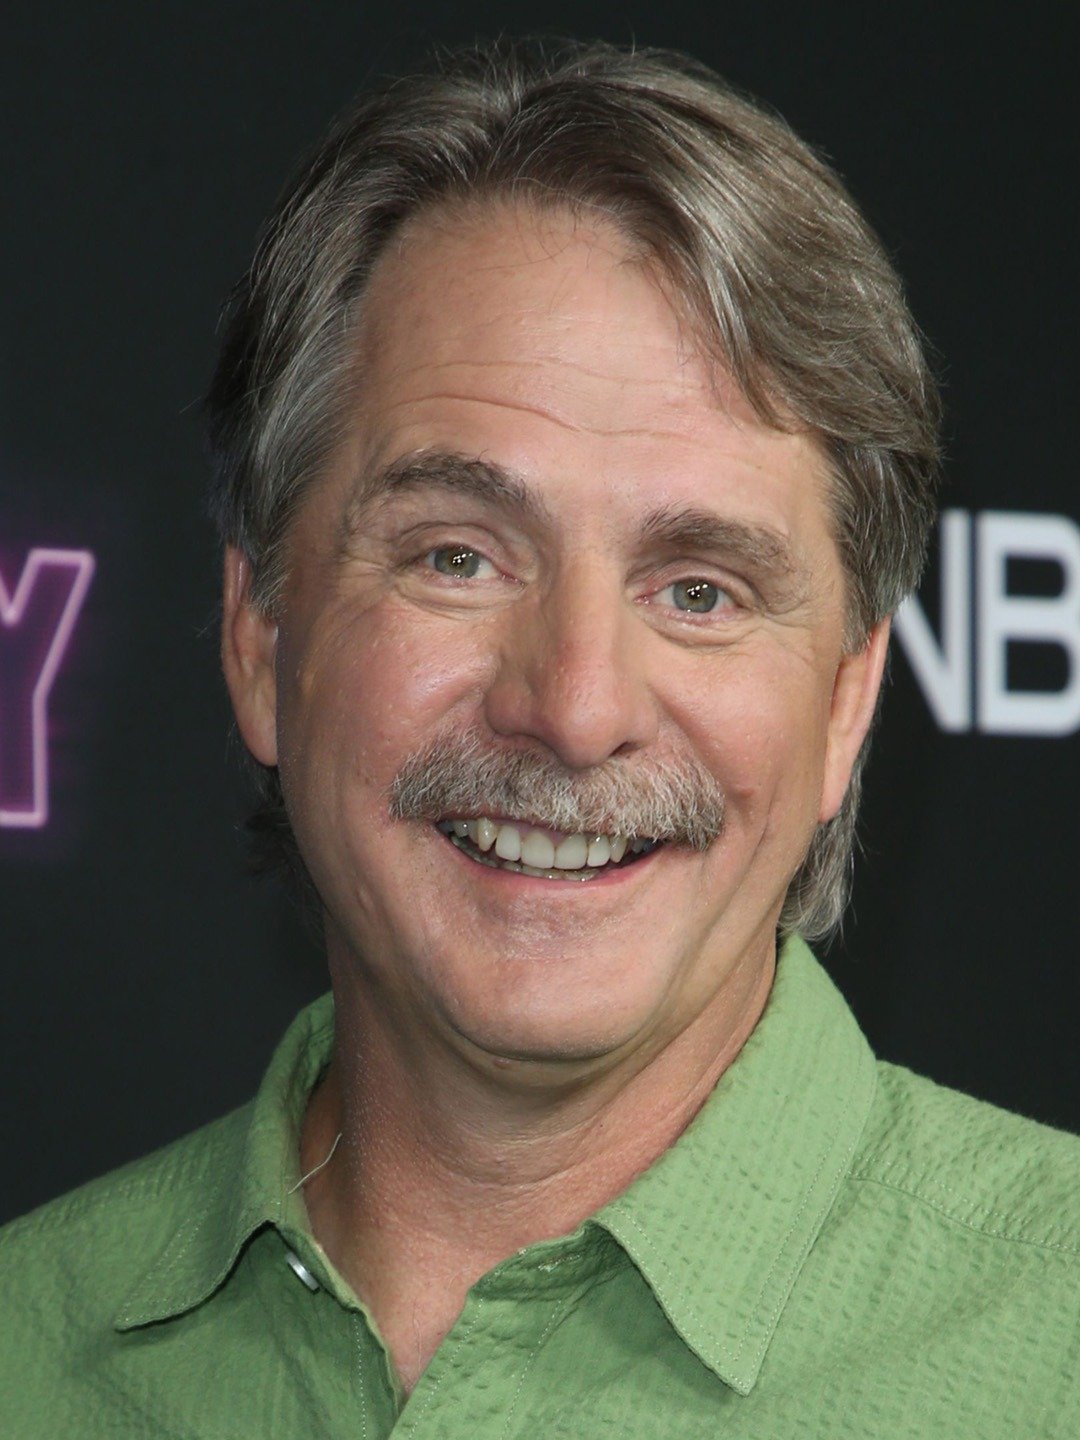 Jeff Foxworthy Comedian, Actor, Personality, Game Show Host